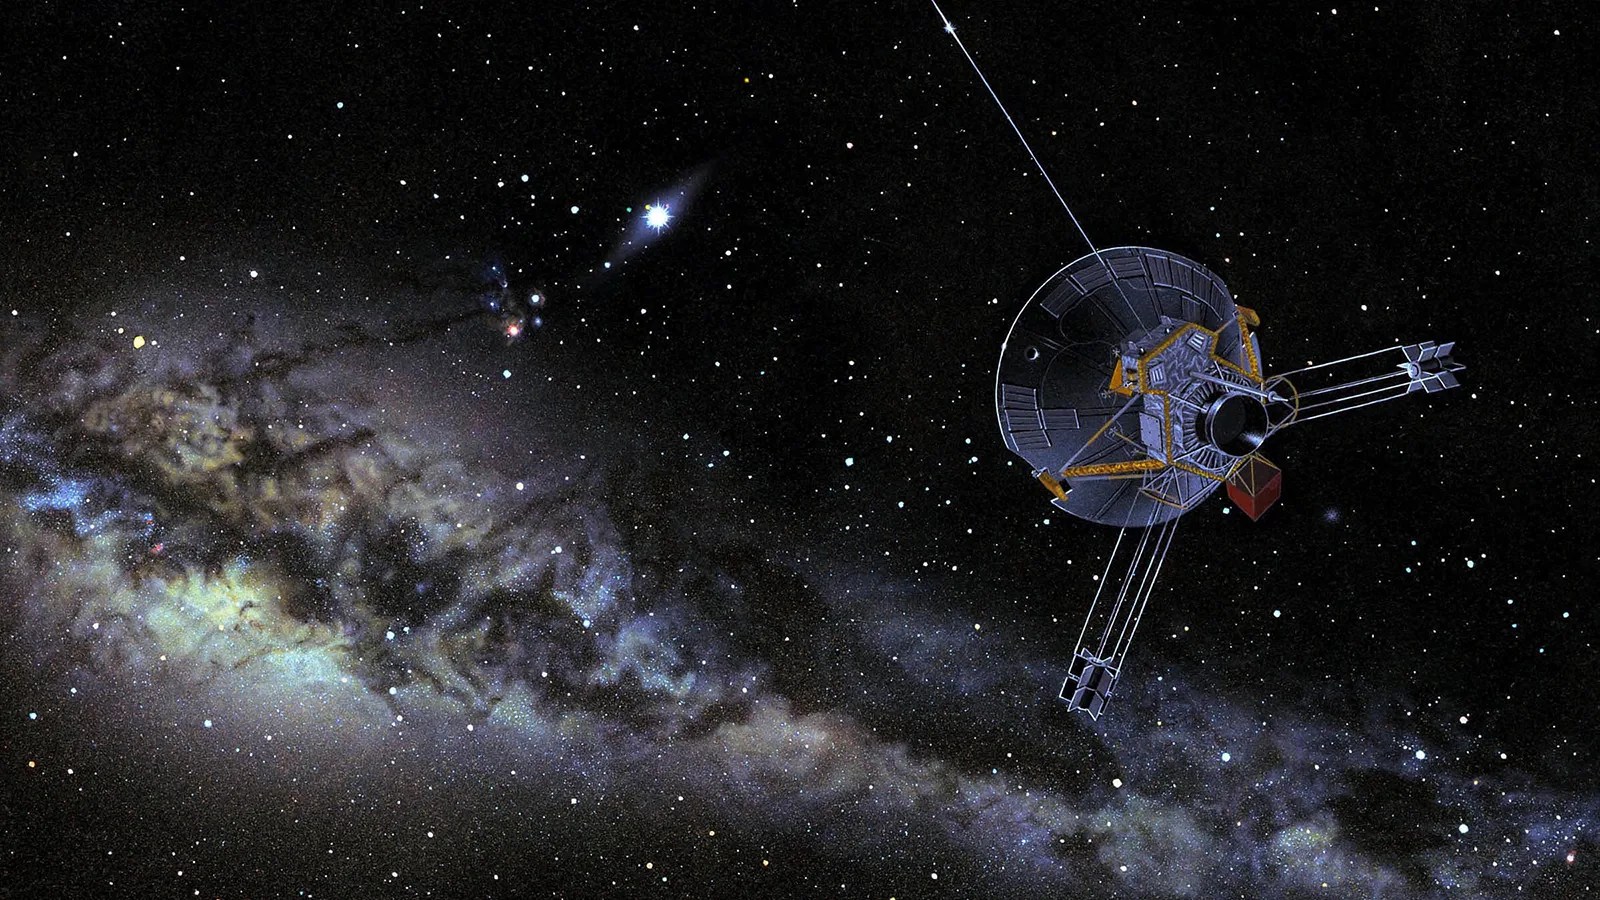 Pioneer Spacecraft with Milky Way in background.